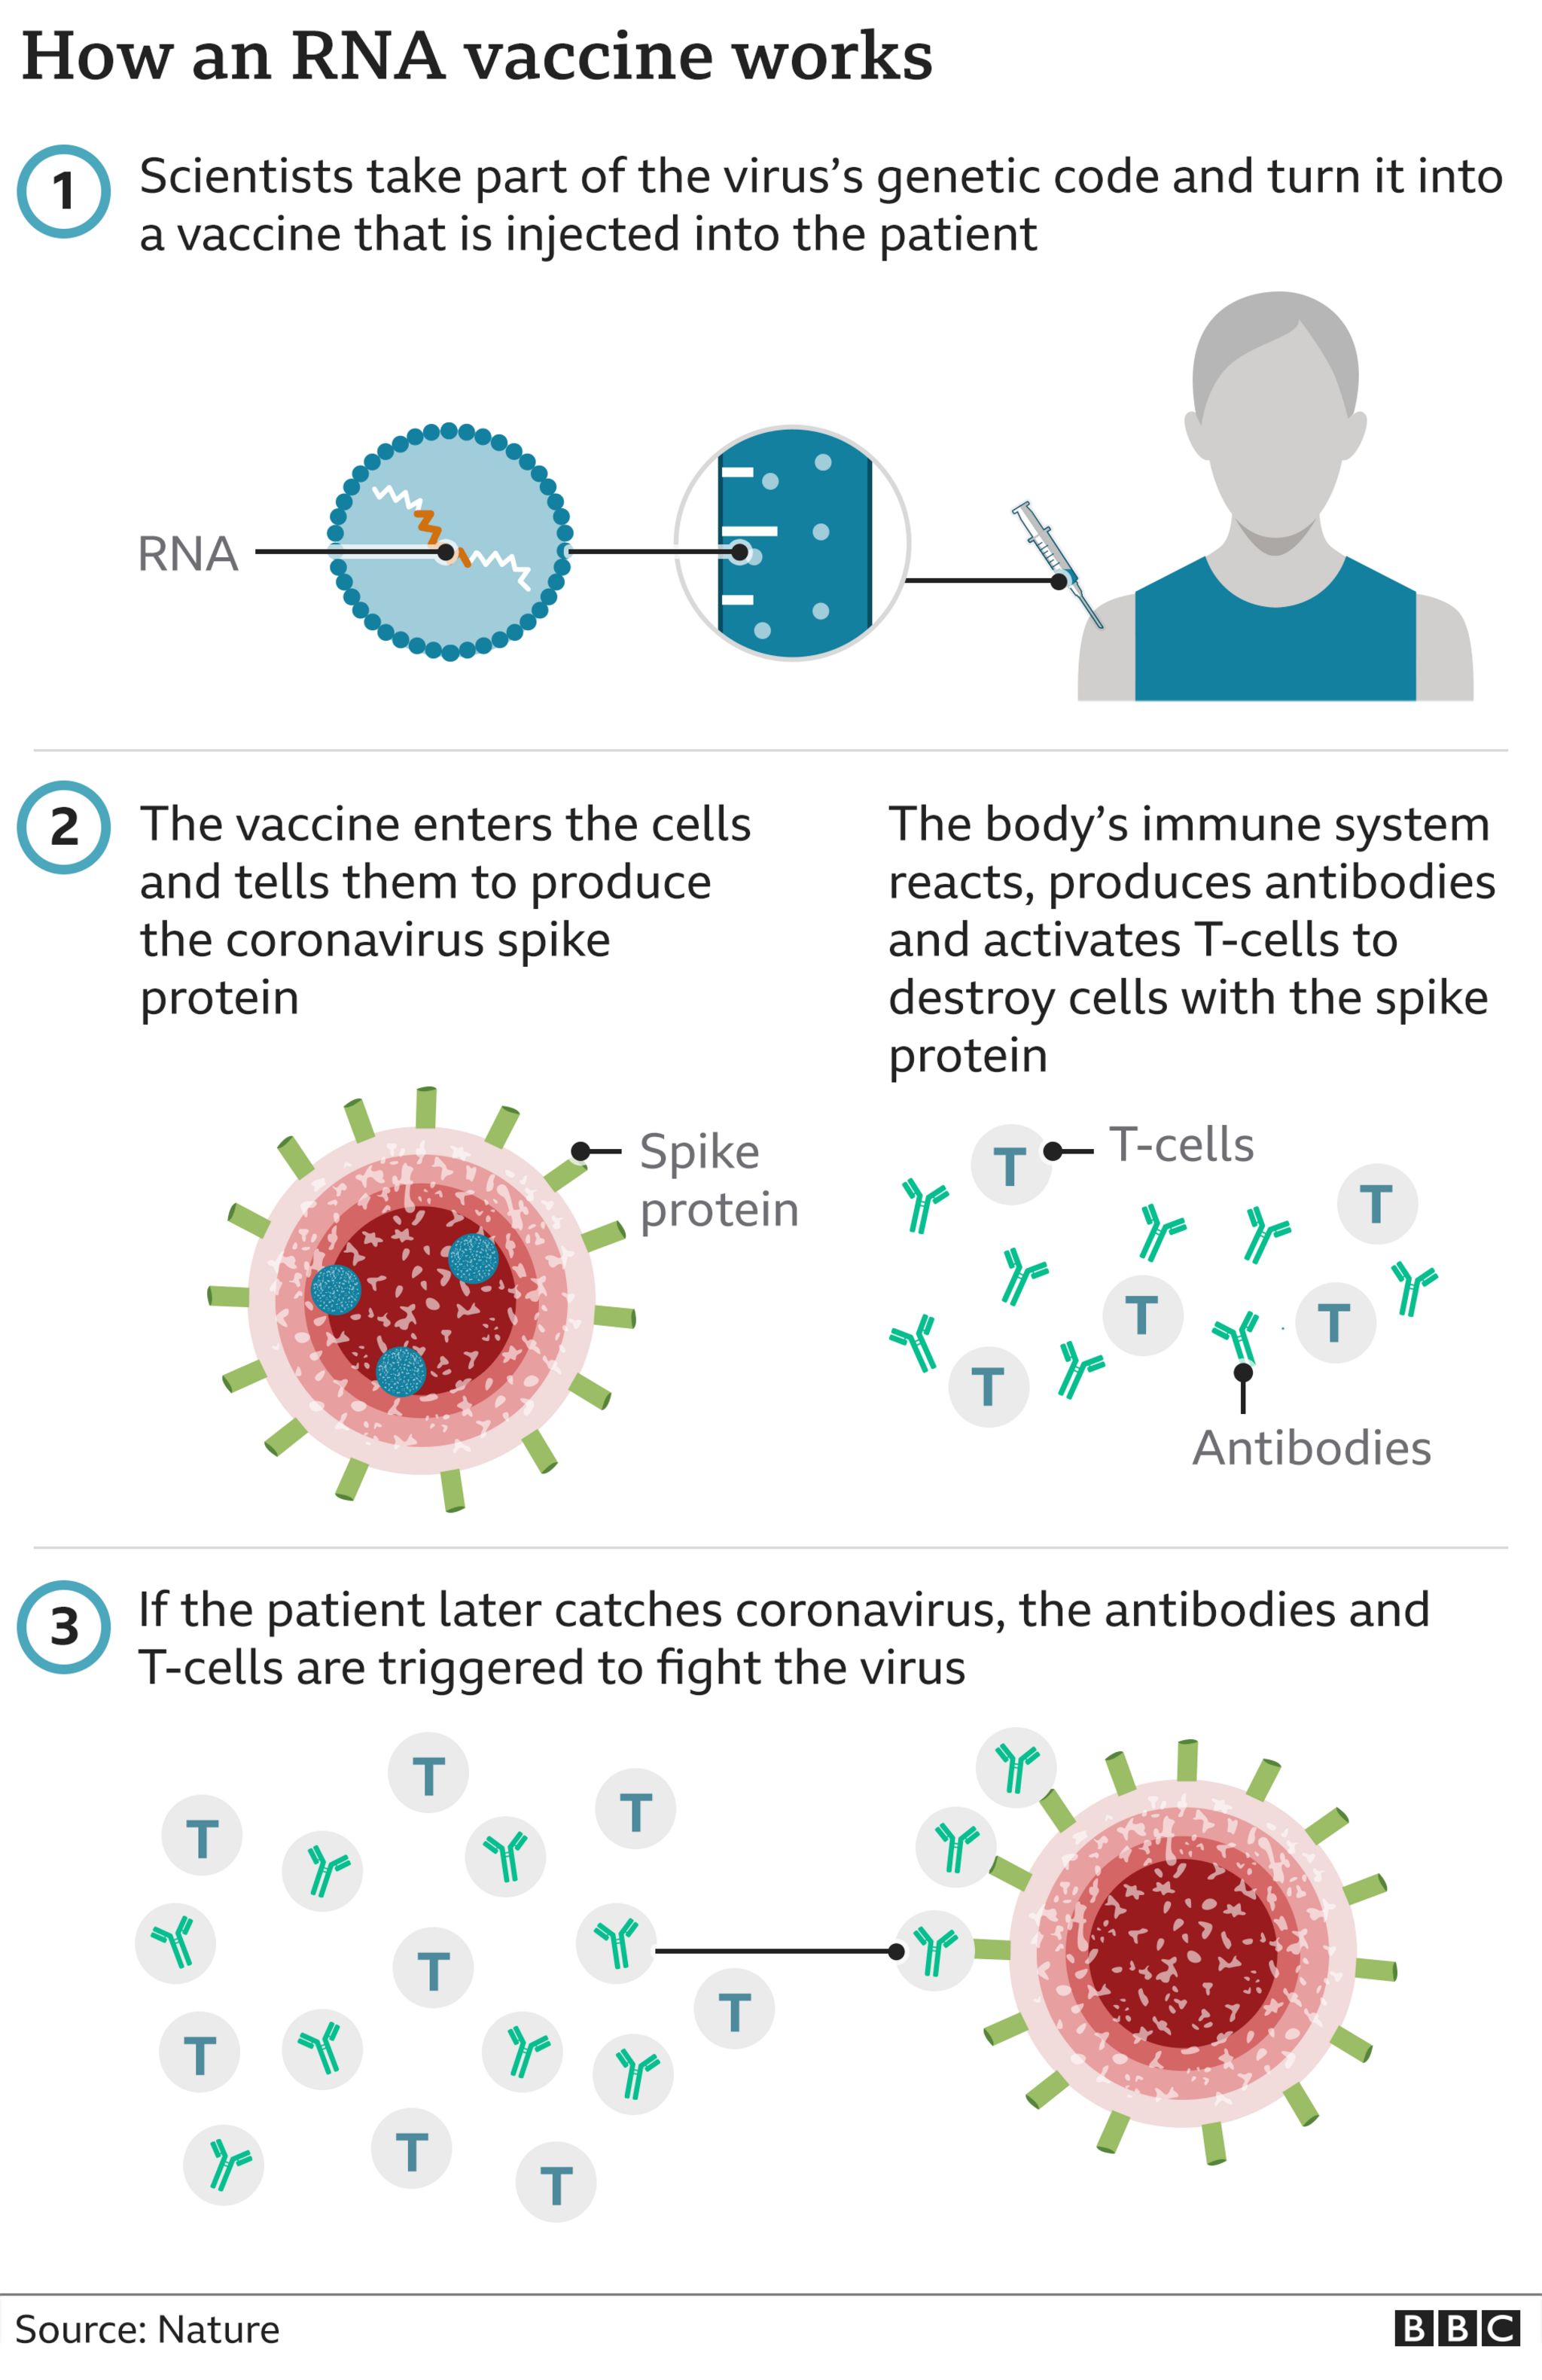 How an RNA vaccine works - the genetic code of the virus is made into a vaccine and injected into the body. The vaccine mimics the coronavirus and the body's immune system reacts by making anti bodies and t - cells. If a person encounters the virus this triggers an immune response.